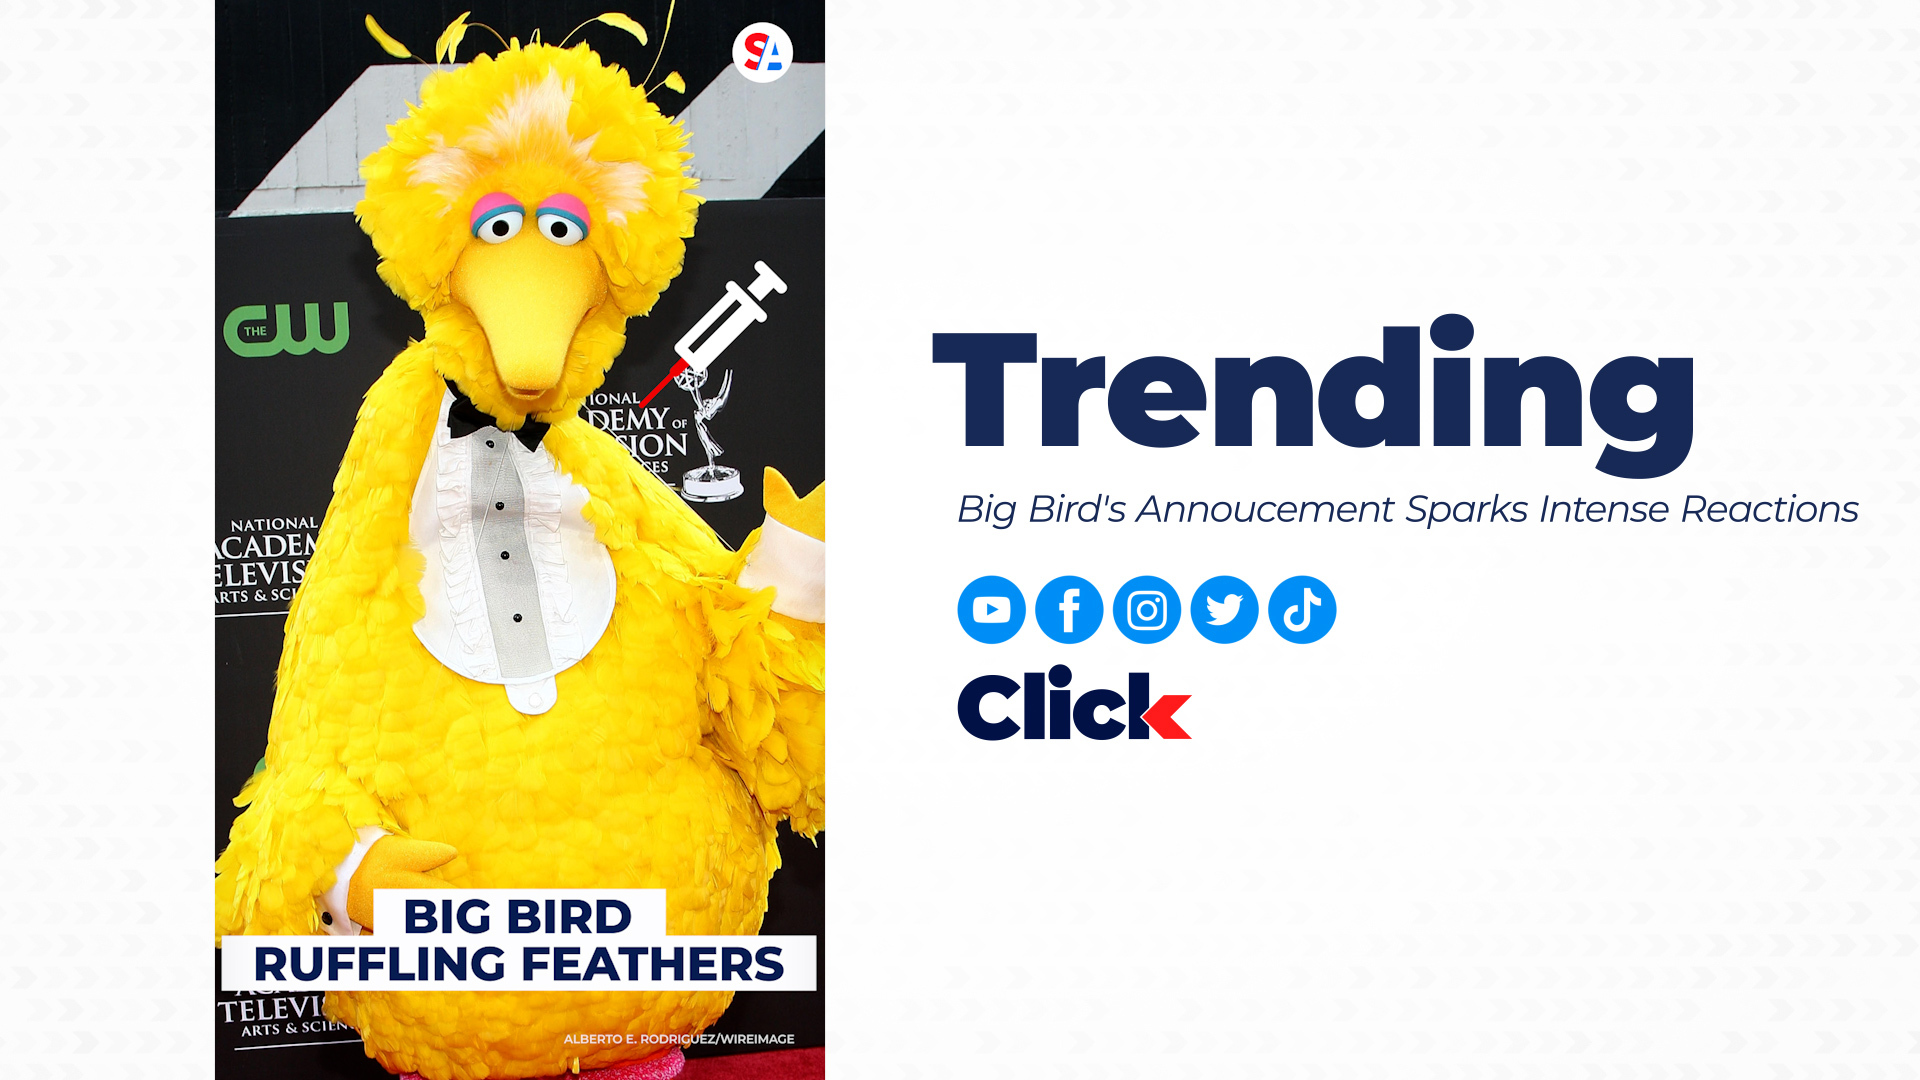 Big Bird sparked controversy after he announced he had been “vaccinated” against COVID-19 on Twitter over the weekend.